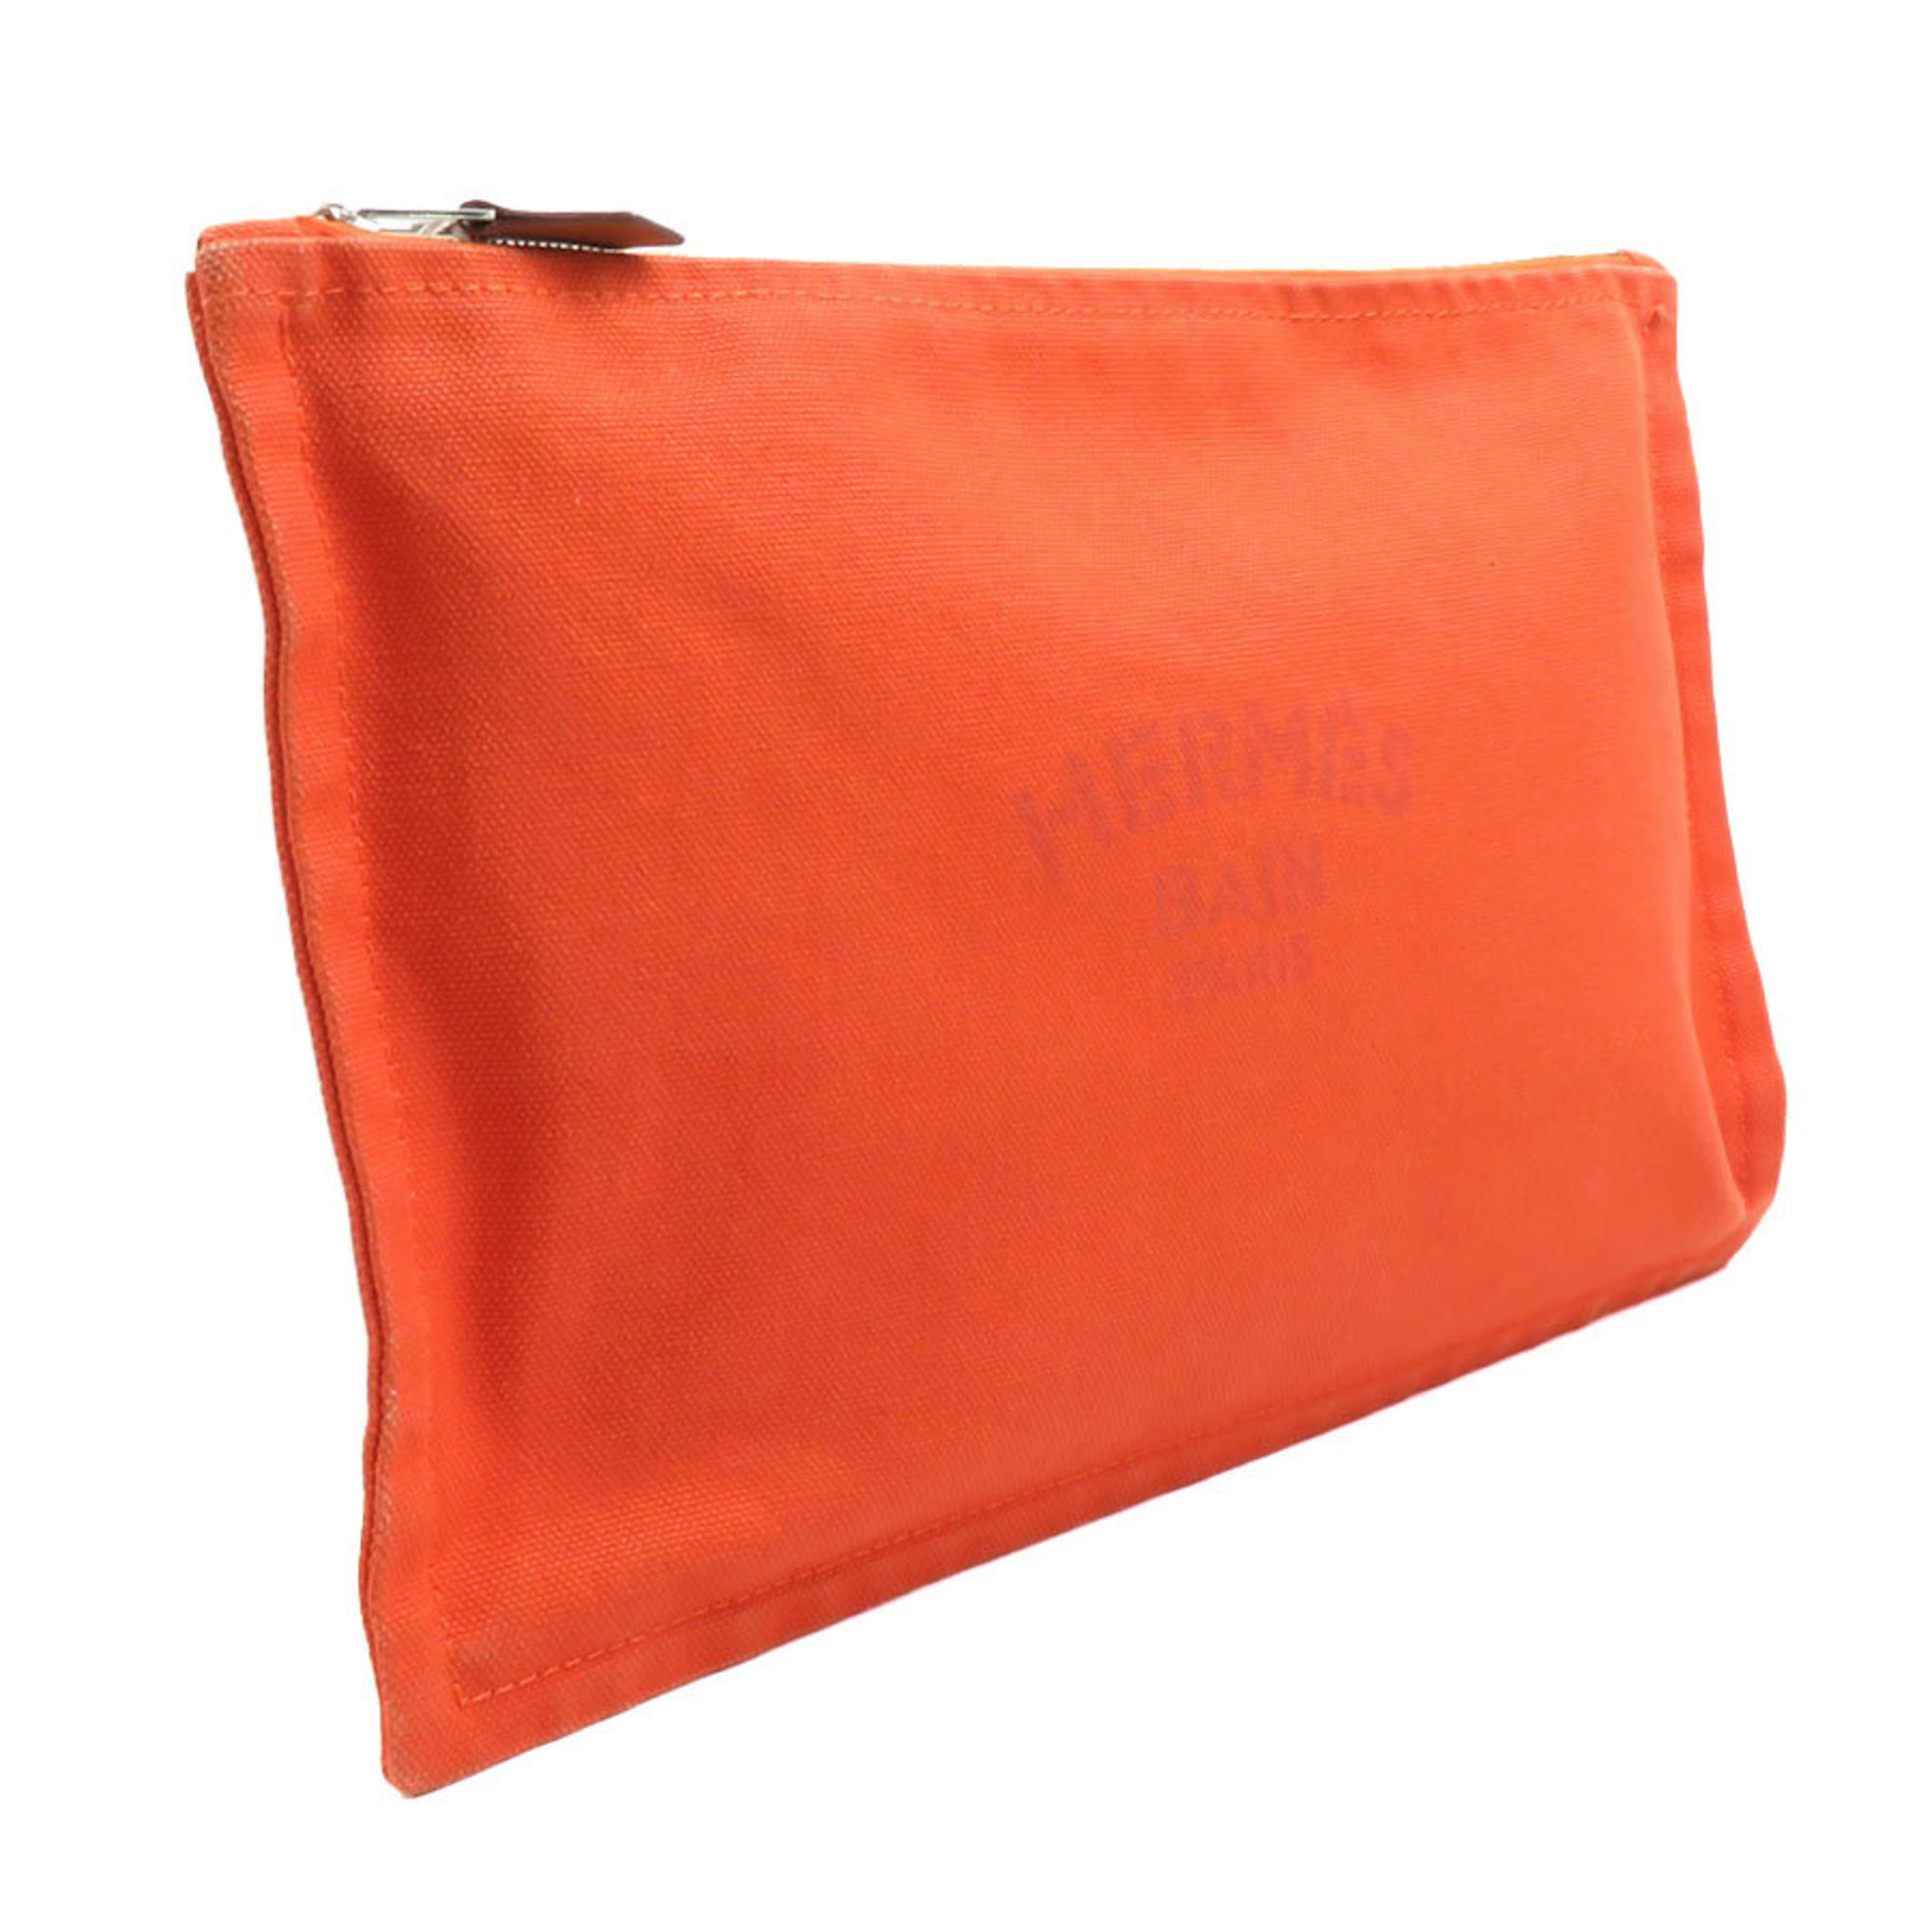 Hermes HERMES Pouch Yachting GM Canvas Orange Unisex r10022f